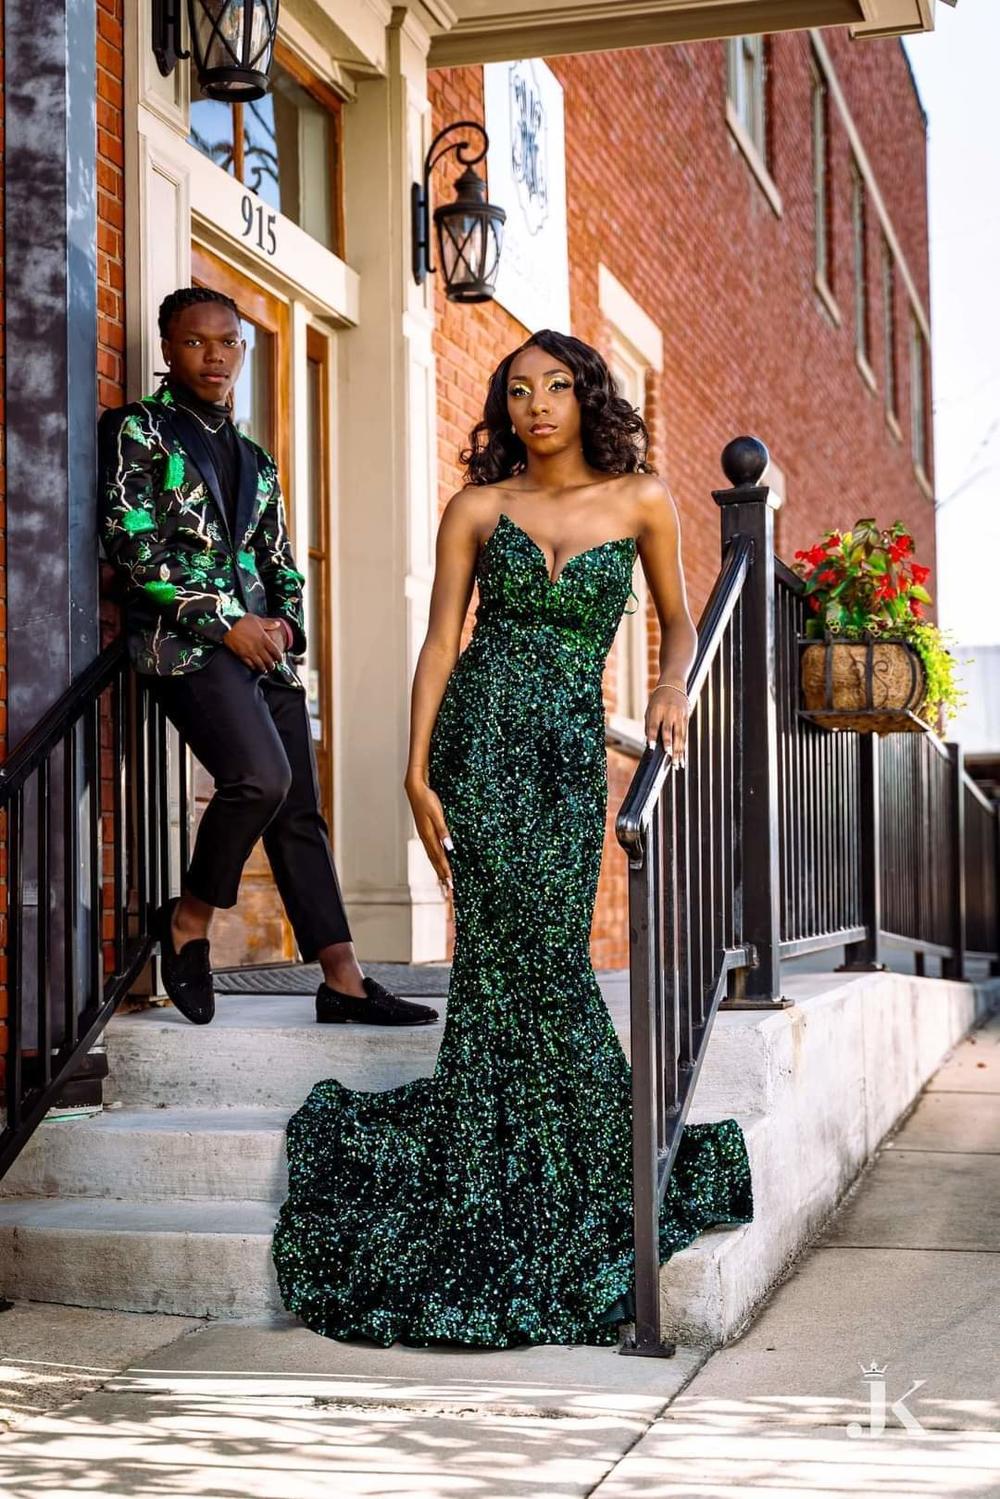 Emory James and Ayma Whitfield. Emory wore an embroidered black and green gold-trimmed suit. Instead of a button-down shirt, he chose a turtleneck. His shoes are black-studded, red-soled loafers.